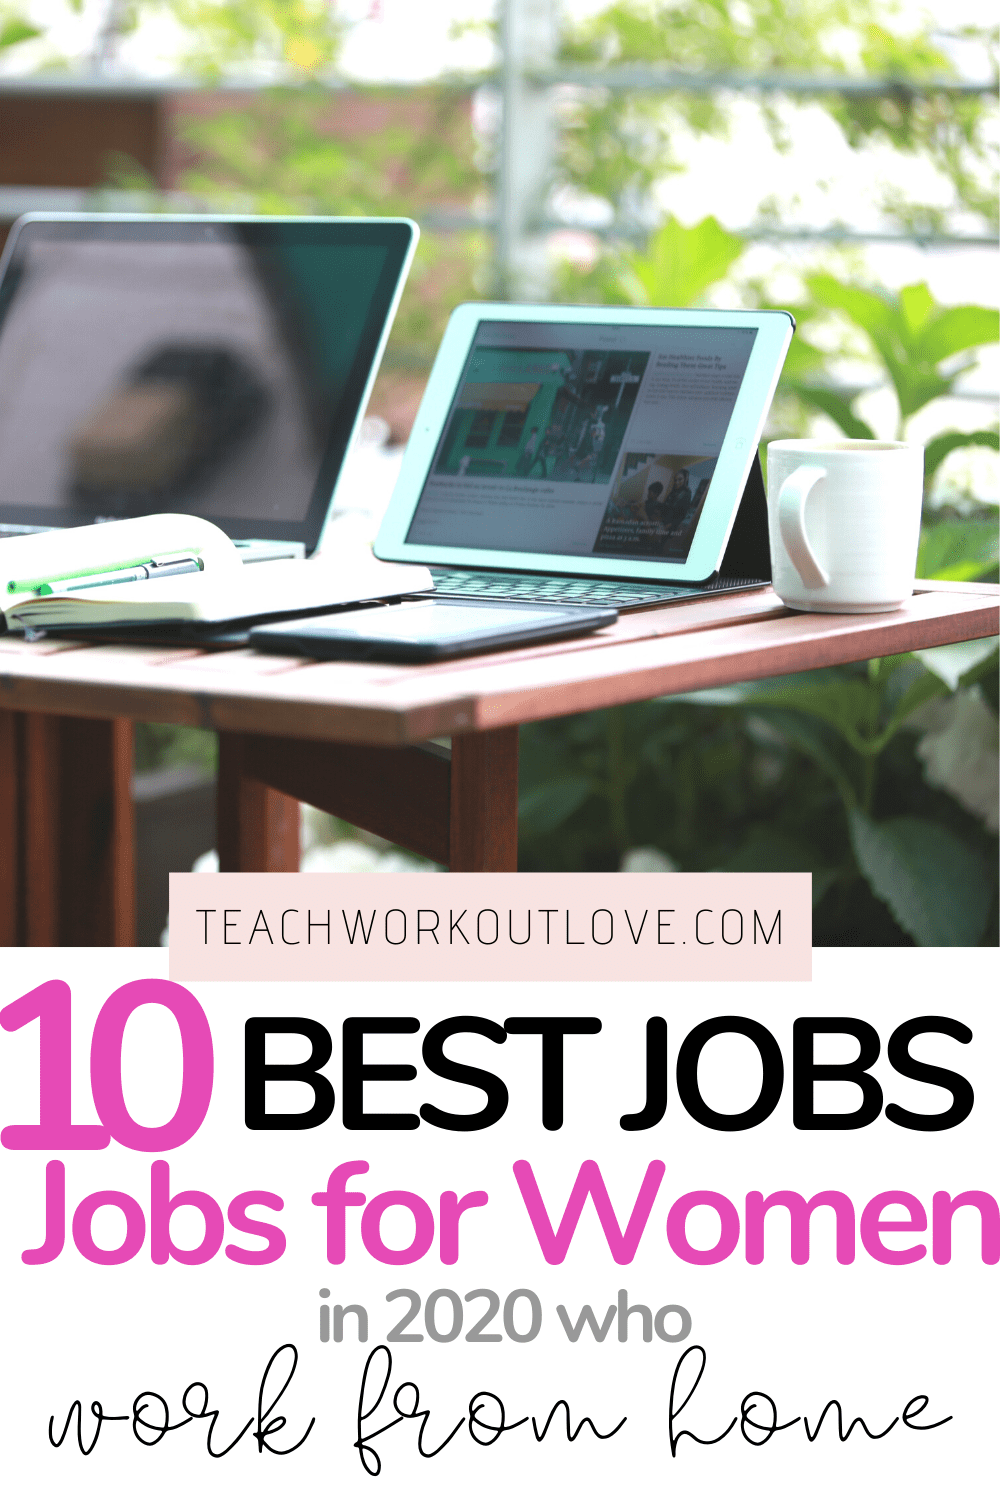  We have created a real step by step guide for setting up your business at home. Here are 10 of the best jobs for women to work from home this year in 2020. 